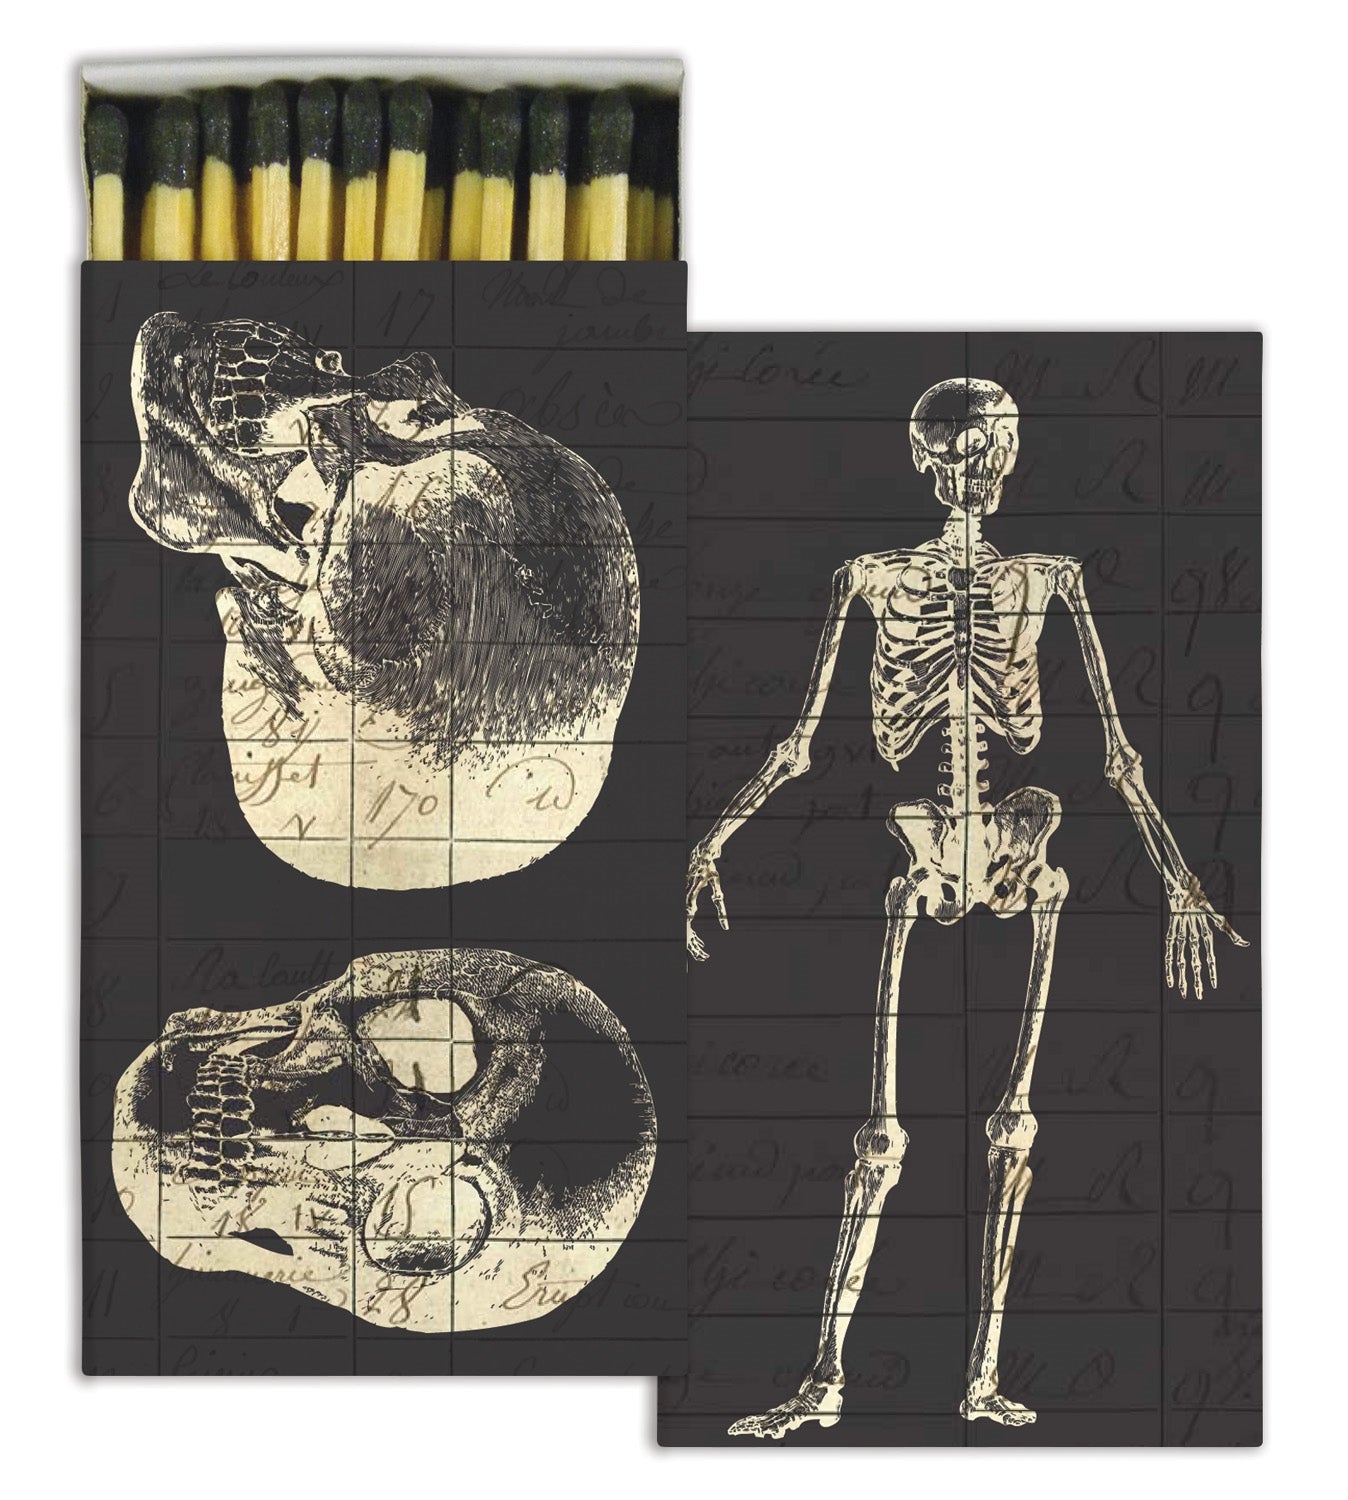 Box of matches with vintage illustration of skeleton on one side and skull on the other, with faint old writing